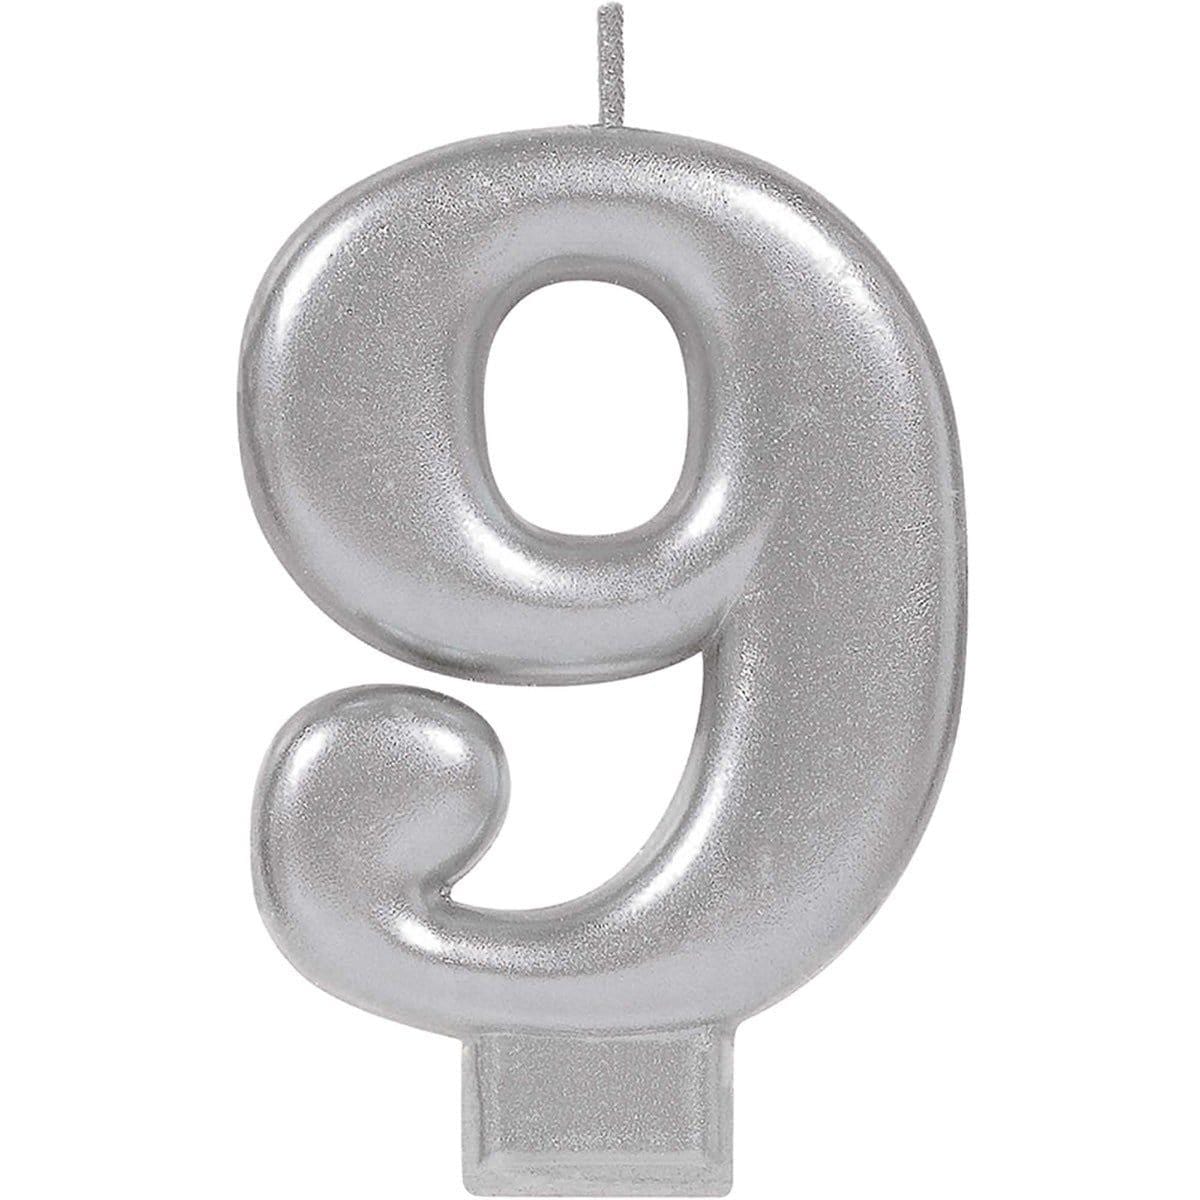 Buy Cake Supplies Metallic Numeral Candle #9 - Silver sold at Party Expert